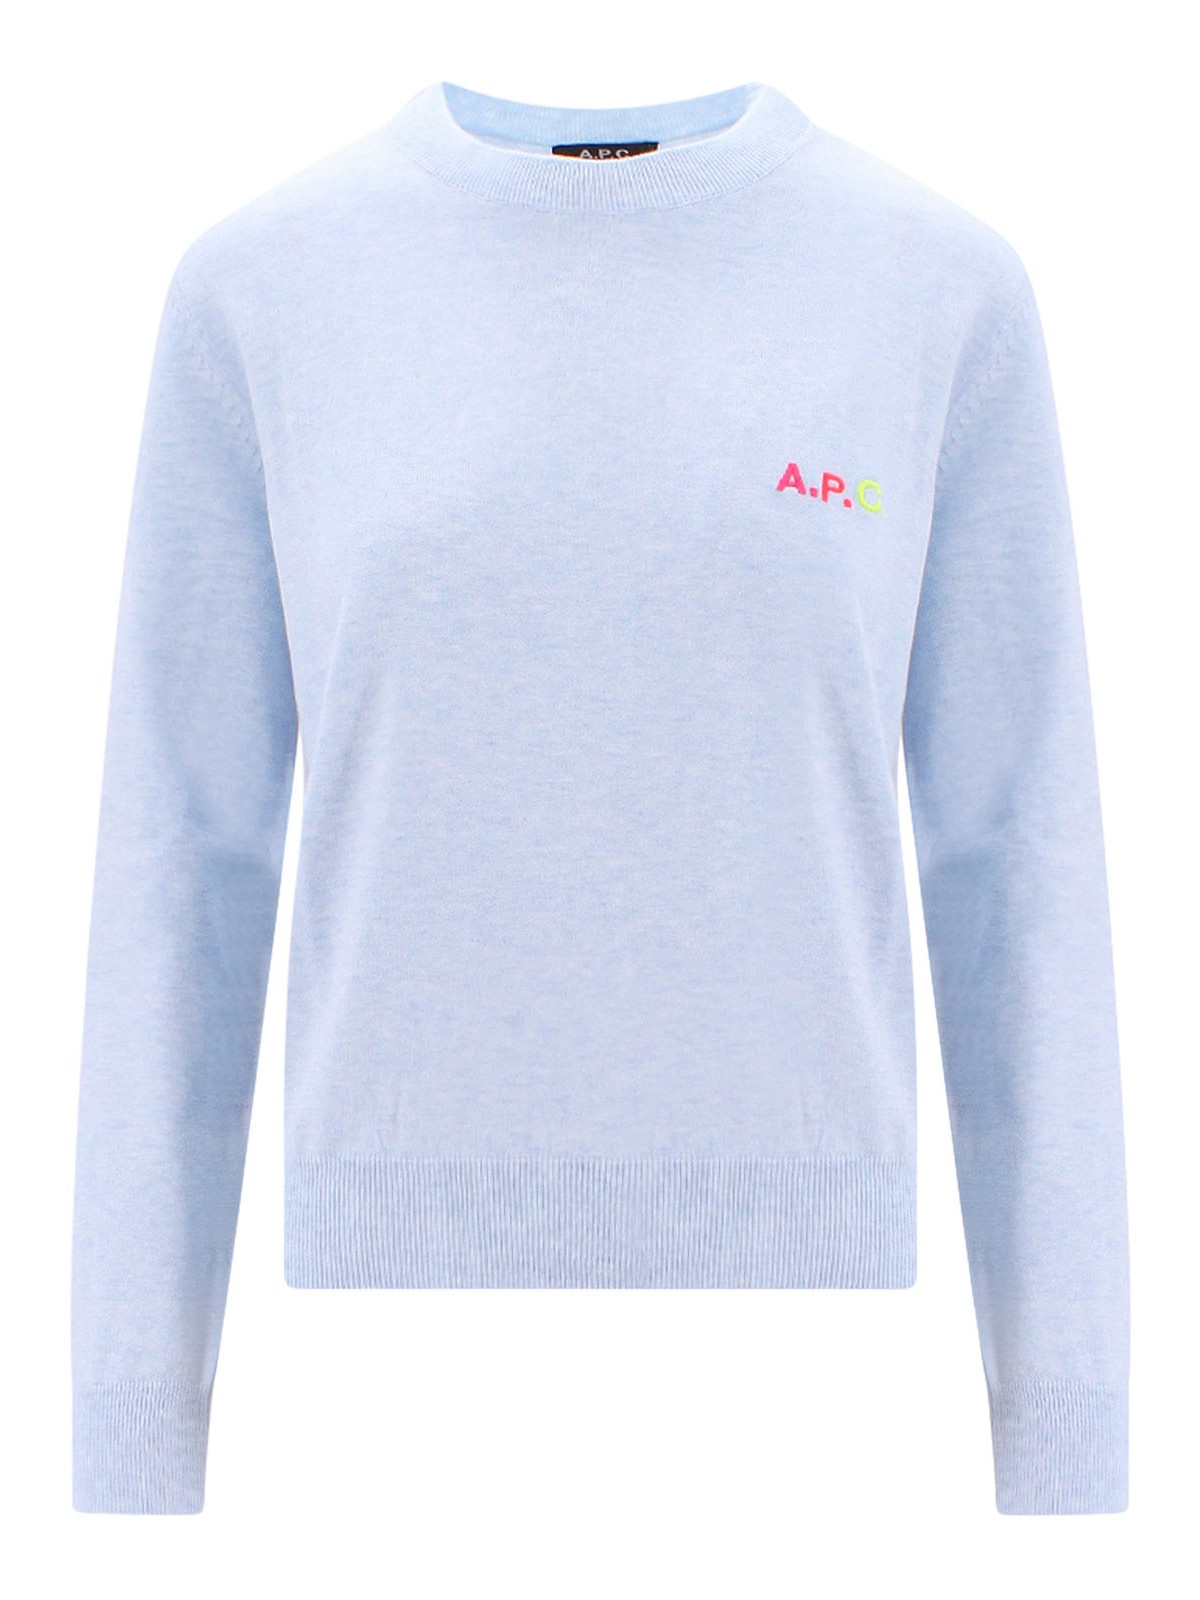 Apc Cotton Jumper With Embroidered Logo In Blue